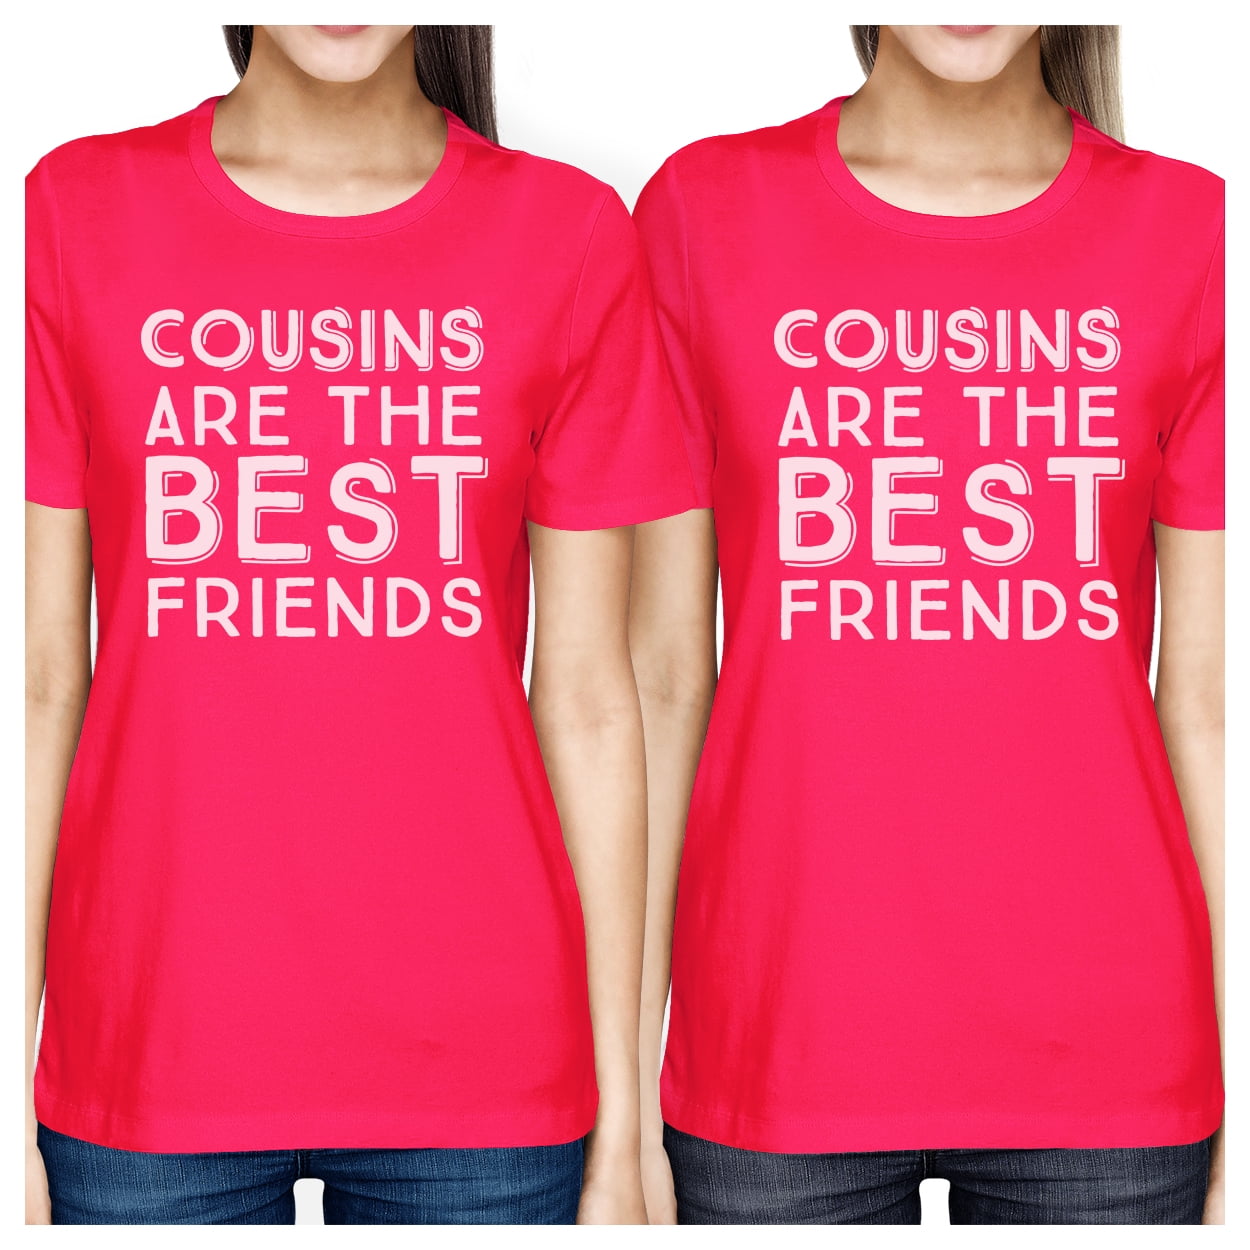 Cousins Make The Best Friend T-Shirt for Baby and Toddler Girls Fun Family Outfits